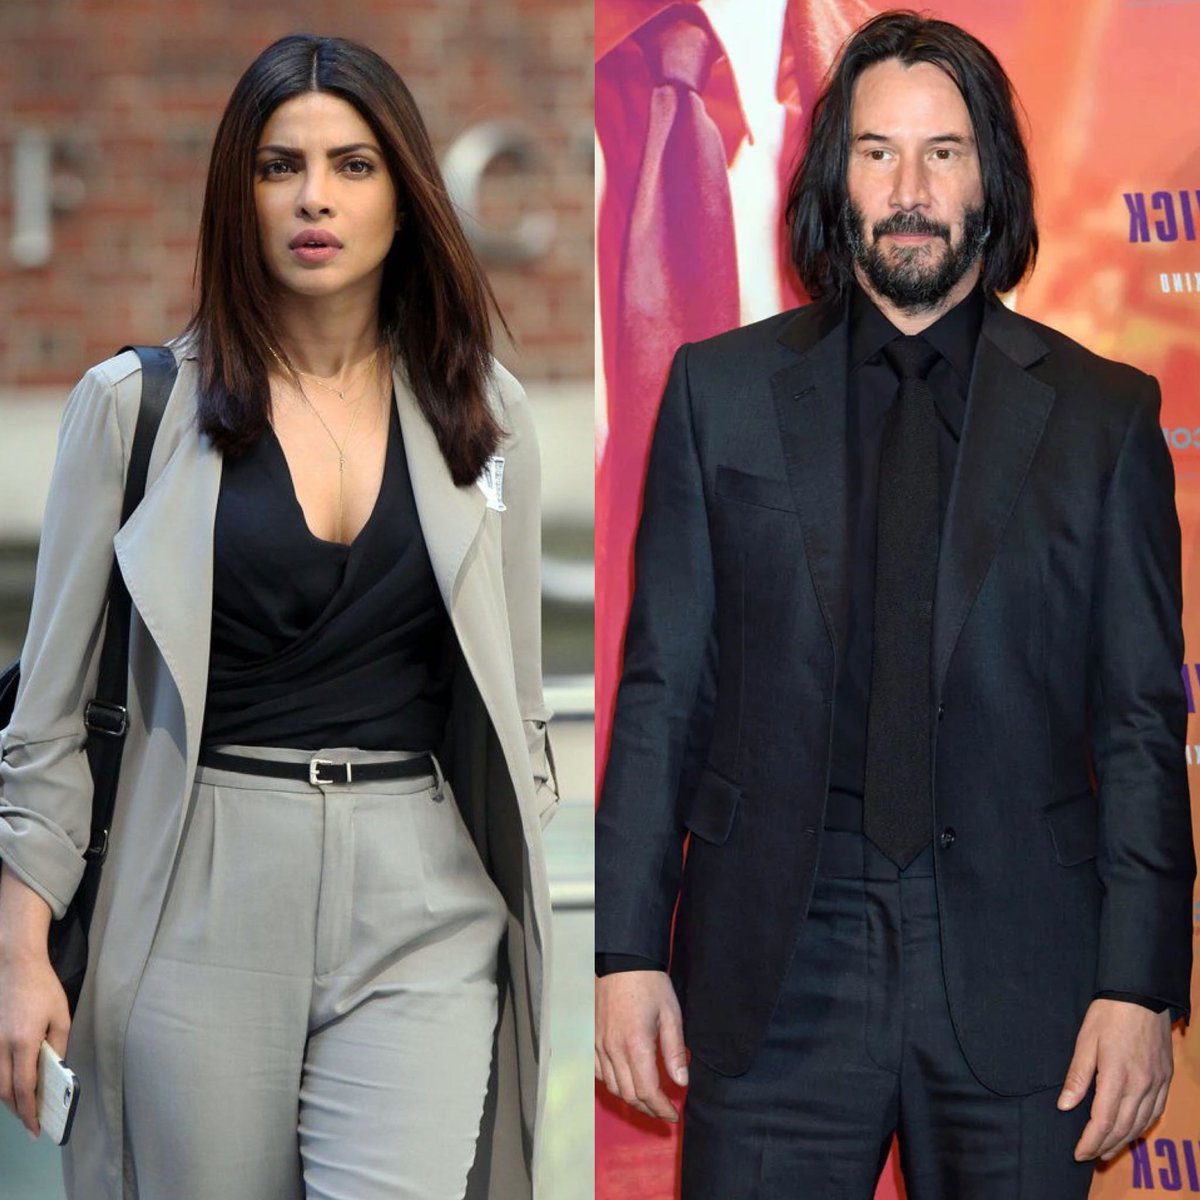 #PriyankaChopra all set to star in the fourth instalment of the #Matrix series along with #KeanuReeves.